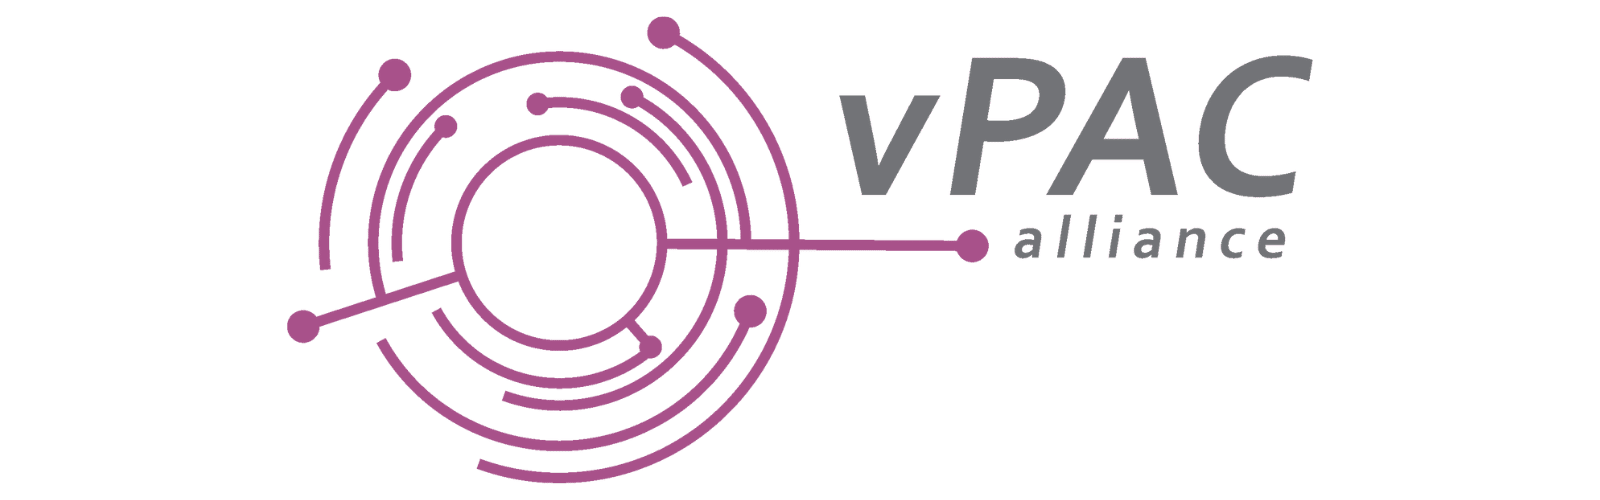 Crystal Group joins the vPAC Alliance as charter member